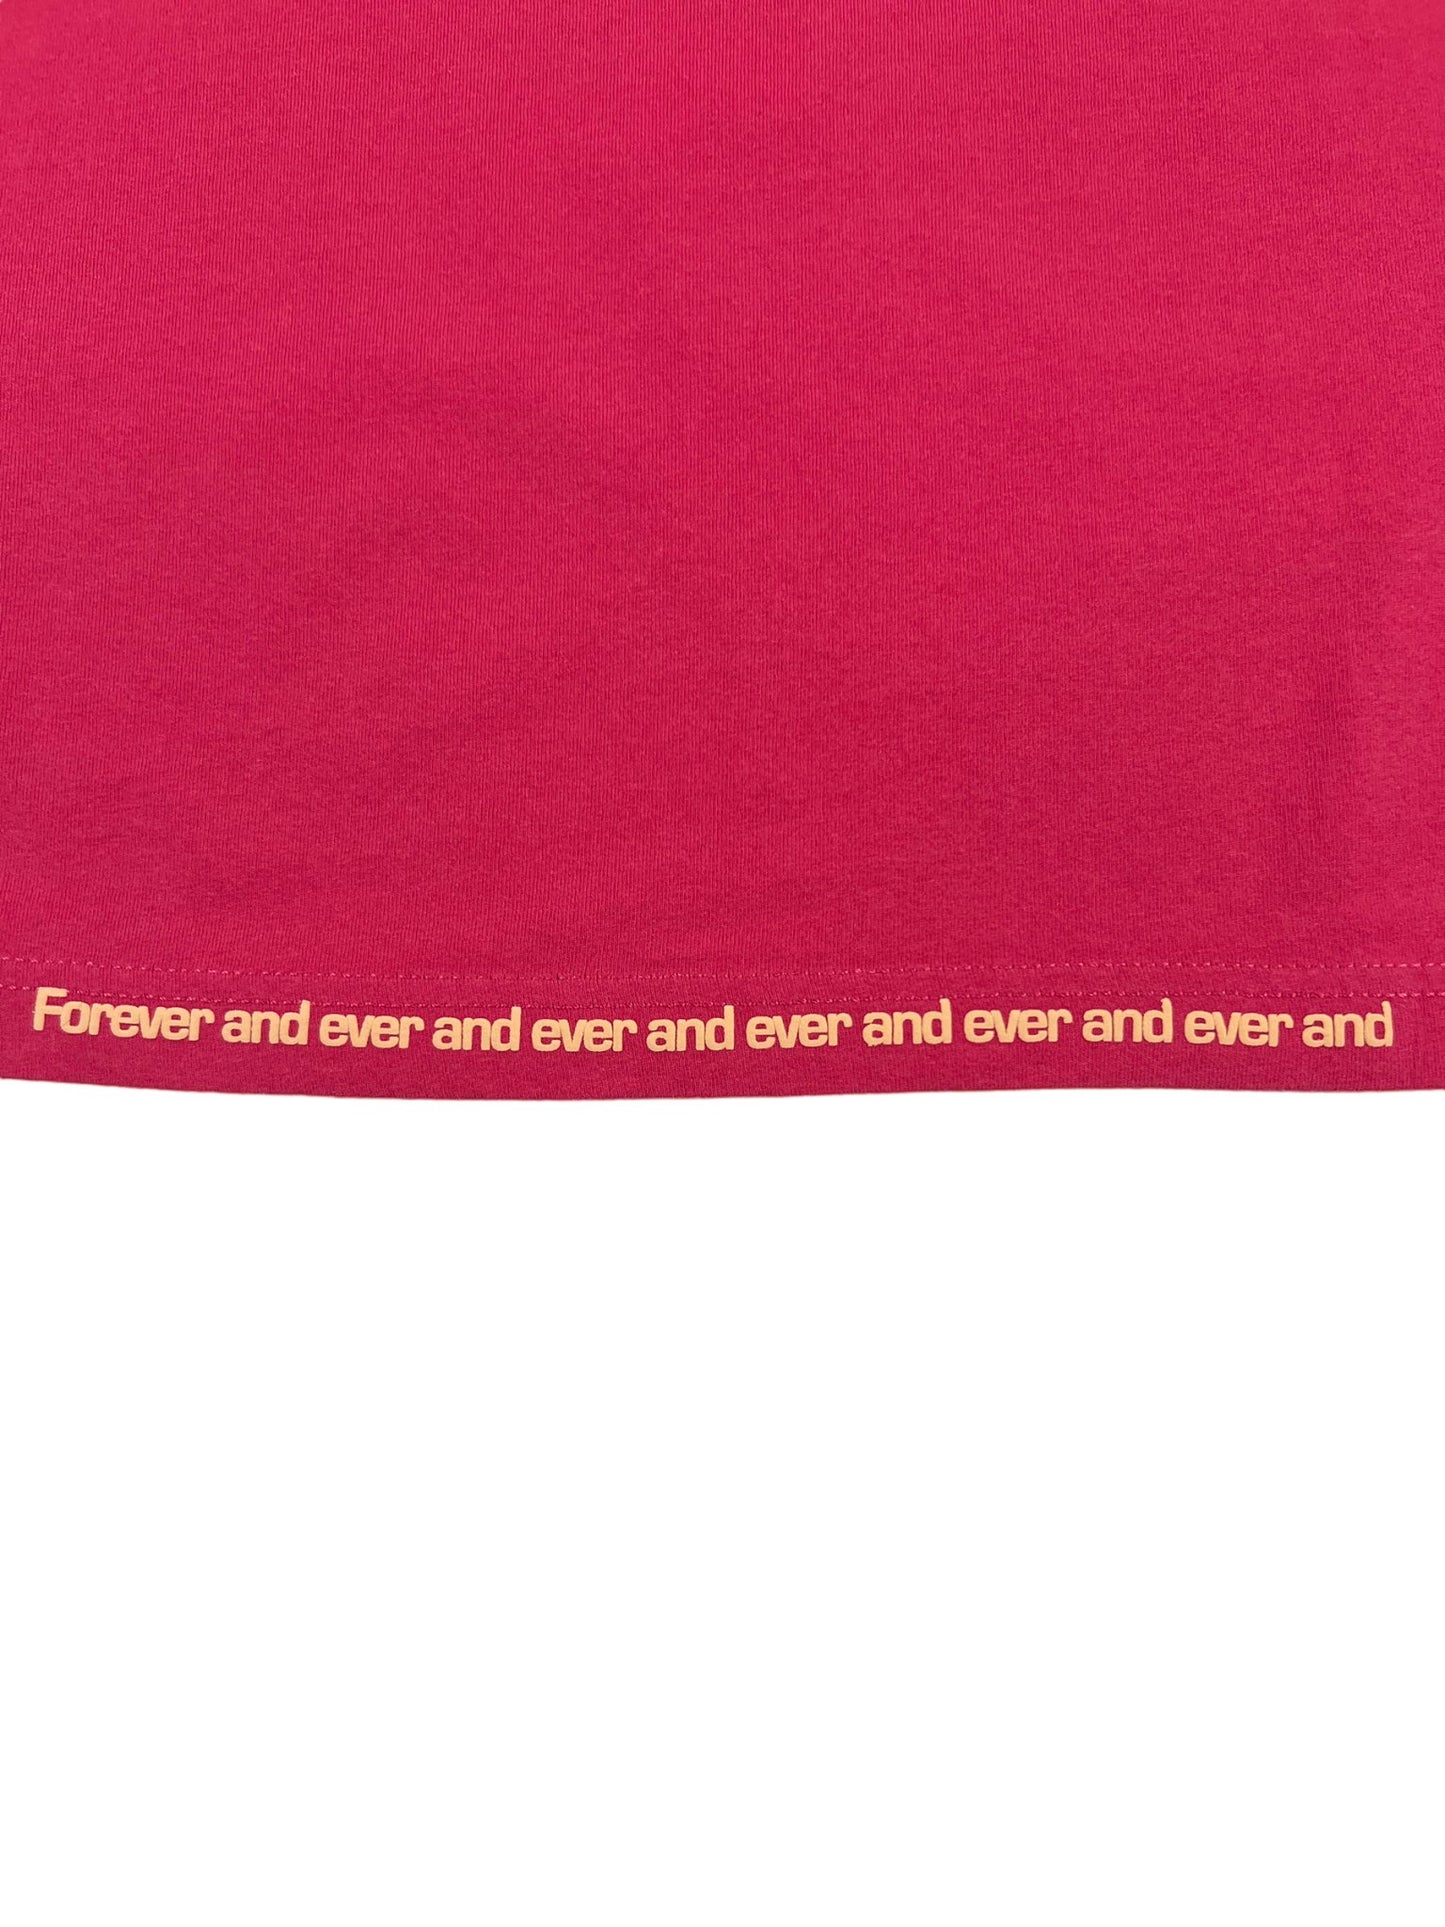 DIESEL T-RUST T-SHIRT BABY PINK with the repeated phrase "forever and ever and ever and ever and ever and ever and" printed in a horizontal line.